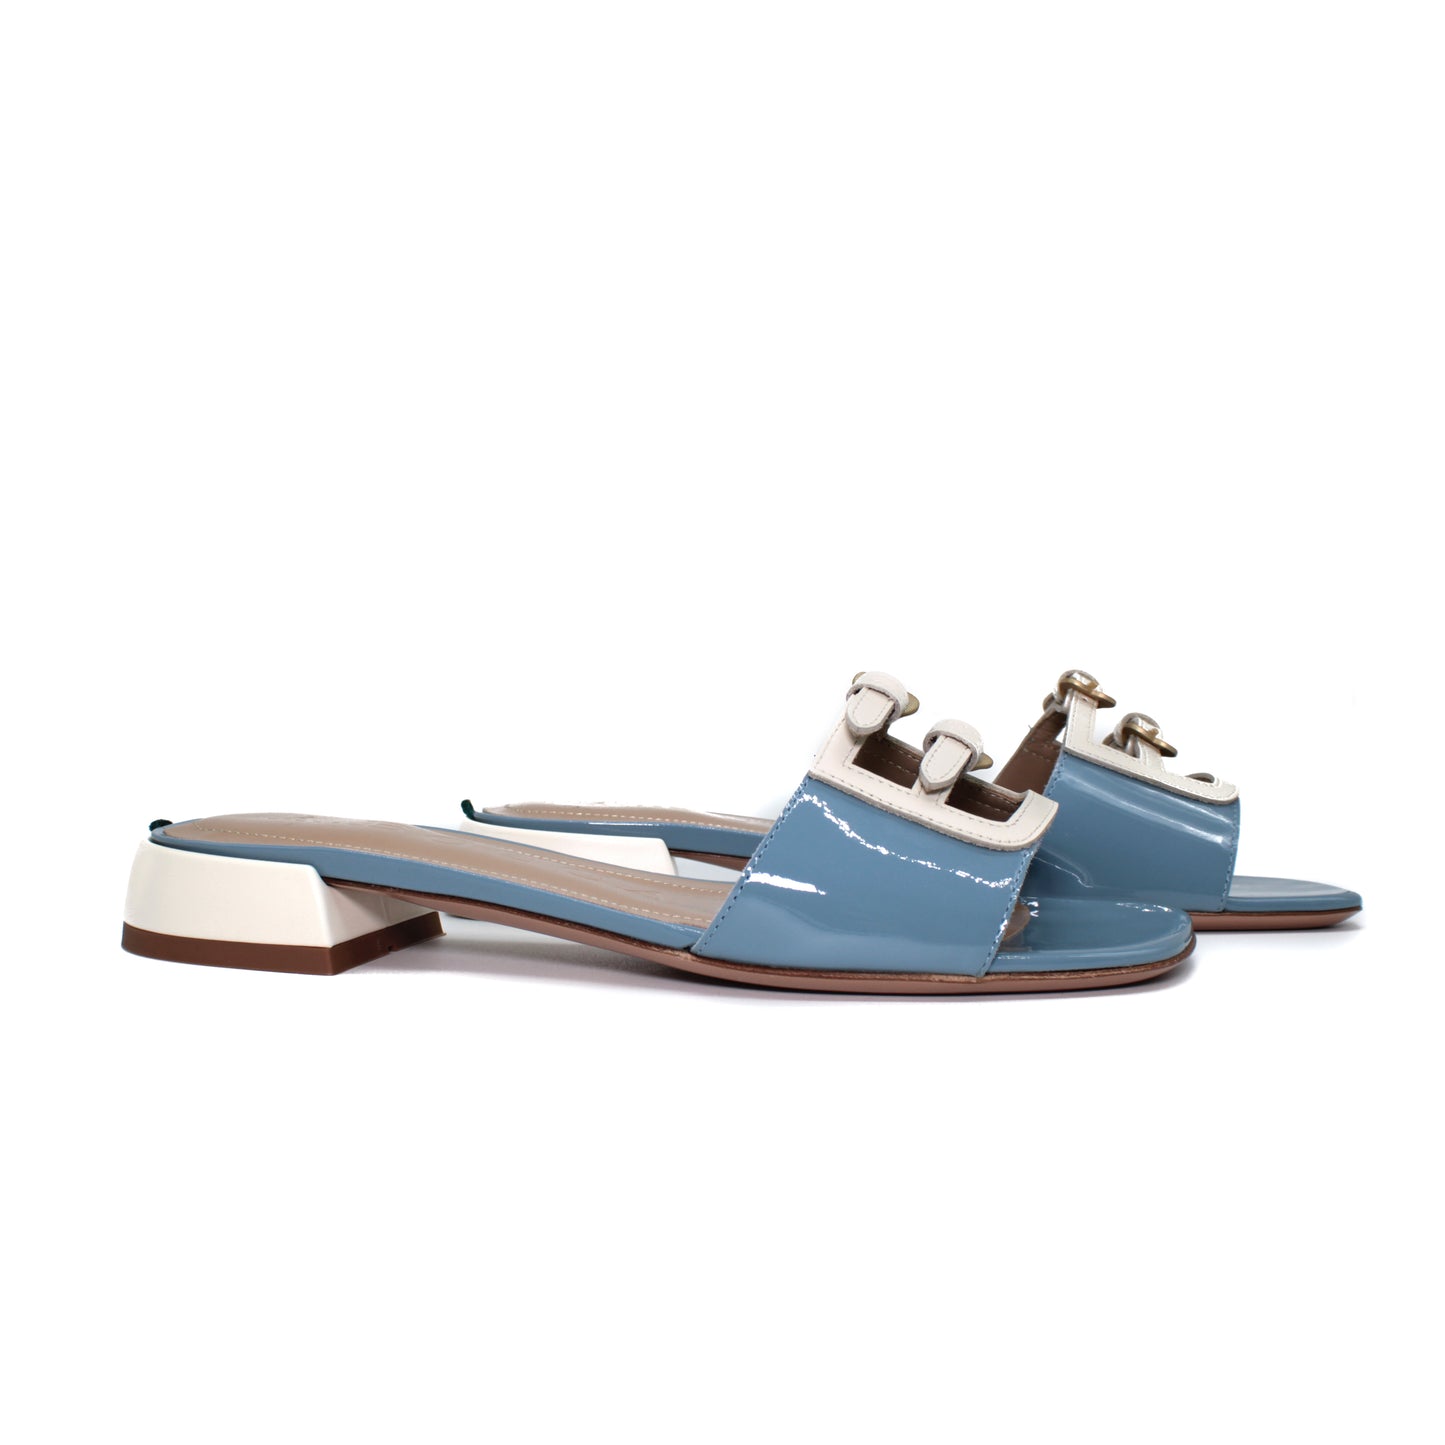 Sandal in two-tone smoky blue/chalk patent leather